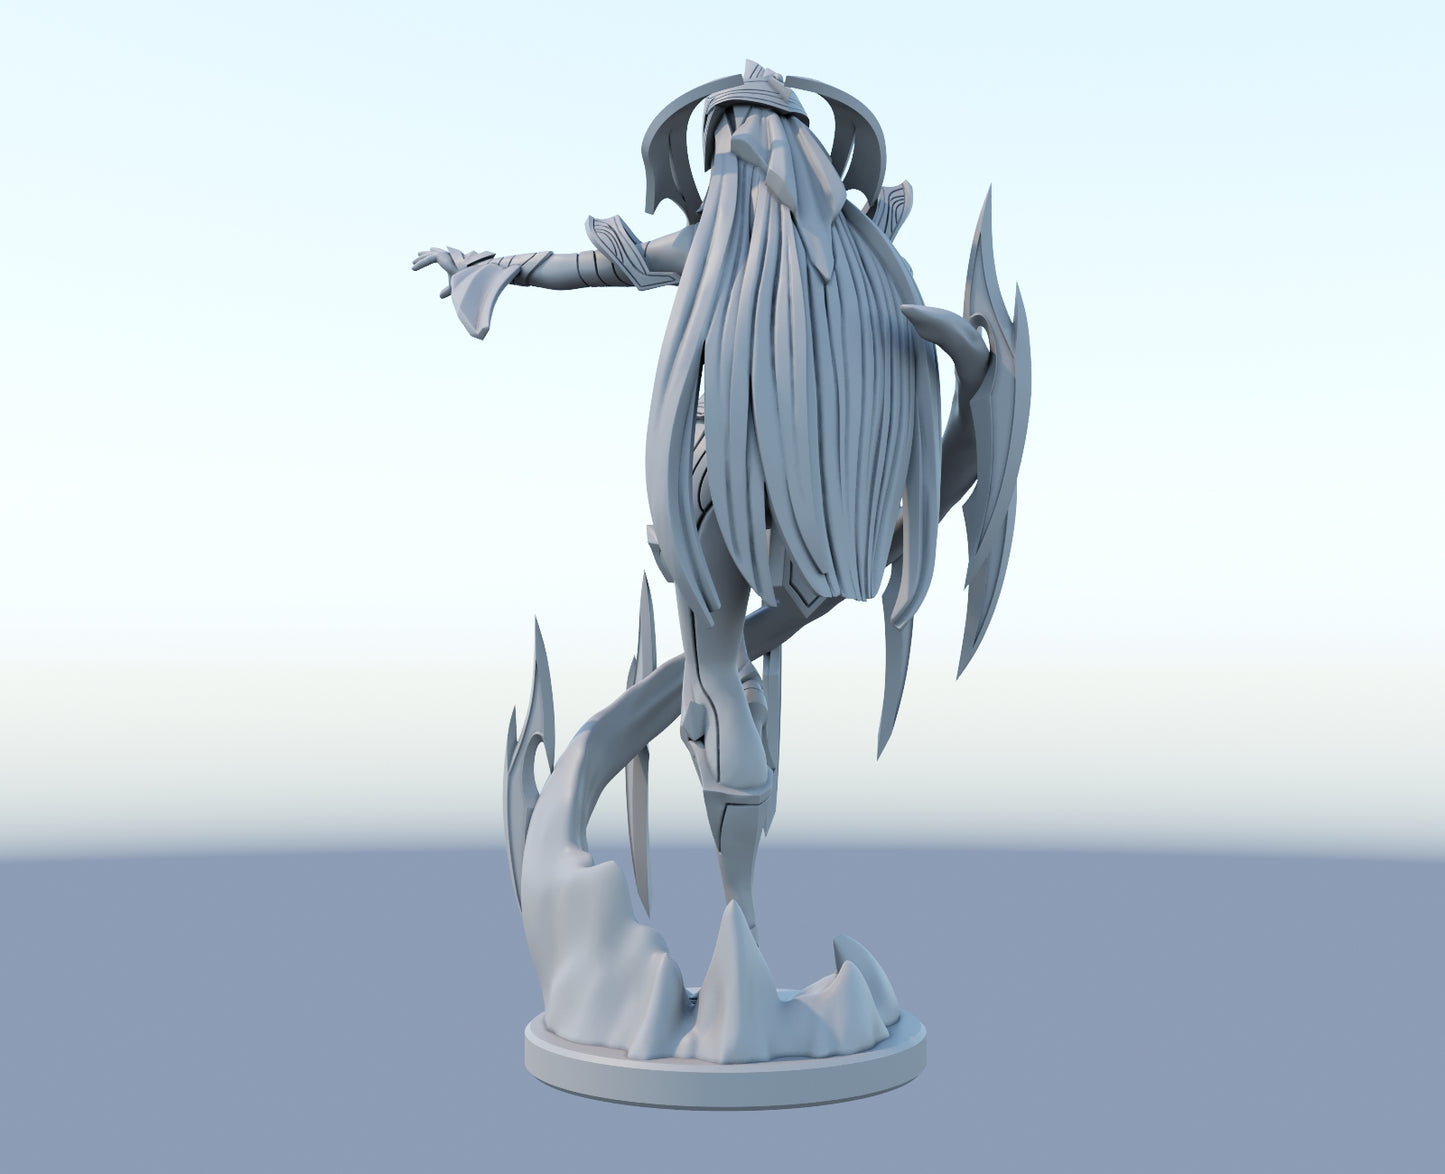 Irelia 3D-printed League of Legends champion figure. Decorate your gaming setup or home with your favorite League of Legends champion! Choose between the unpainted version, perfect for you to paint yourself, or the hand-painted version by a professional painter. Order your figure today!